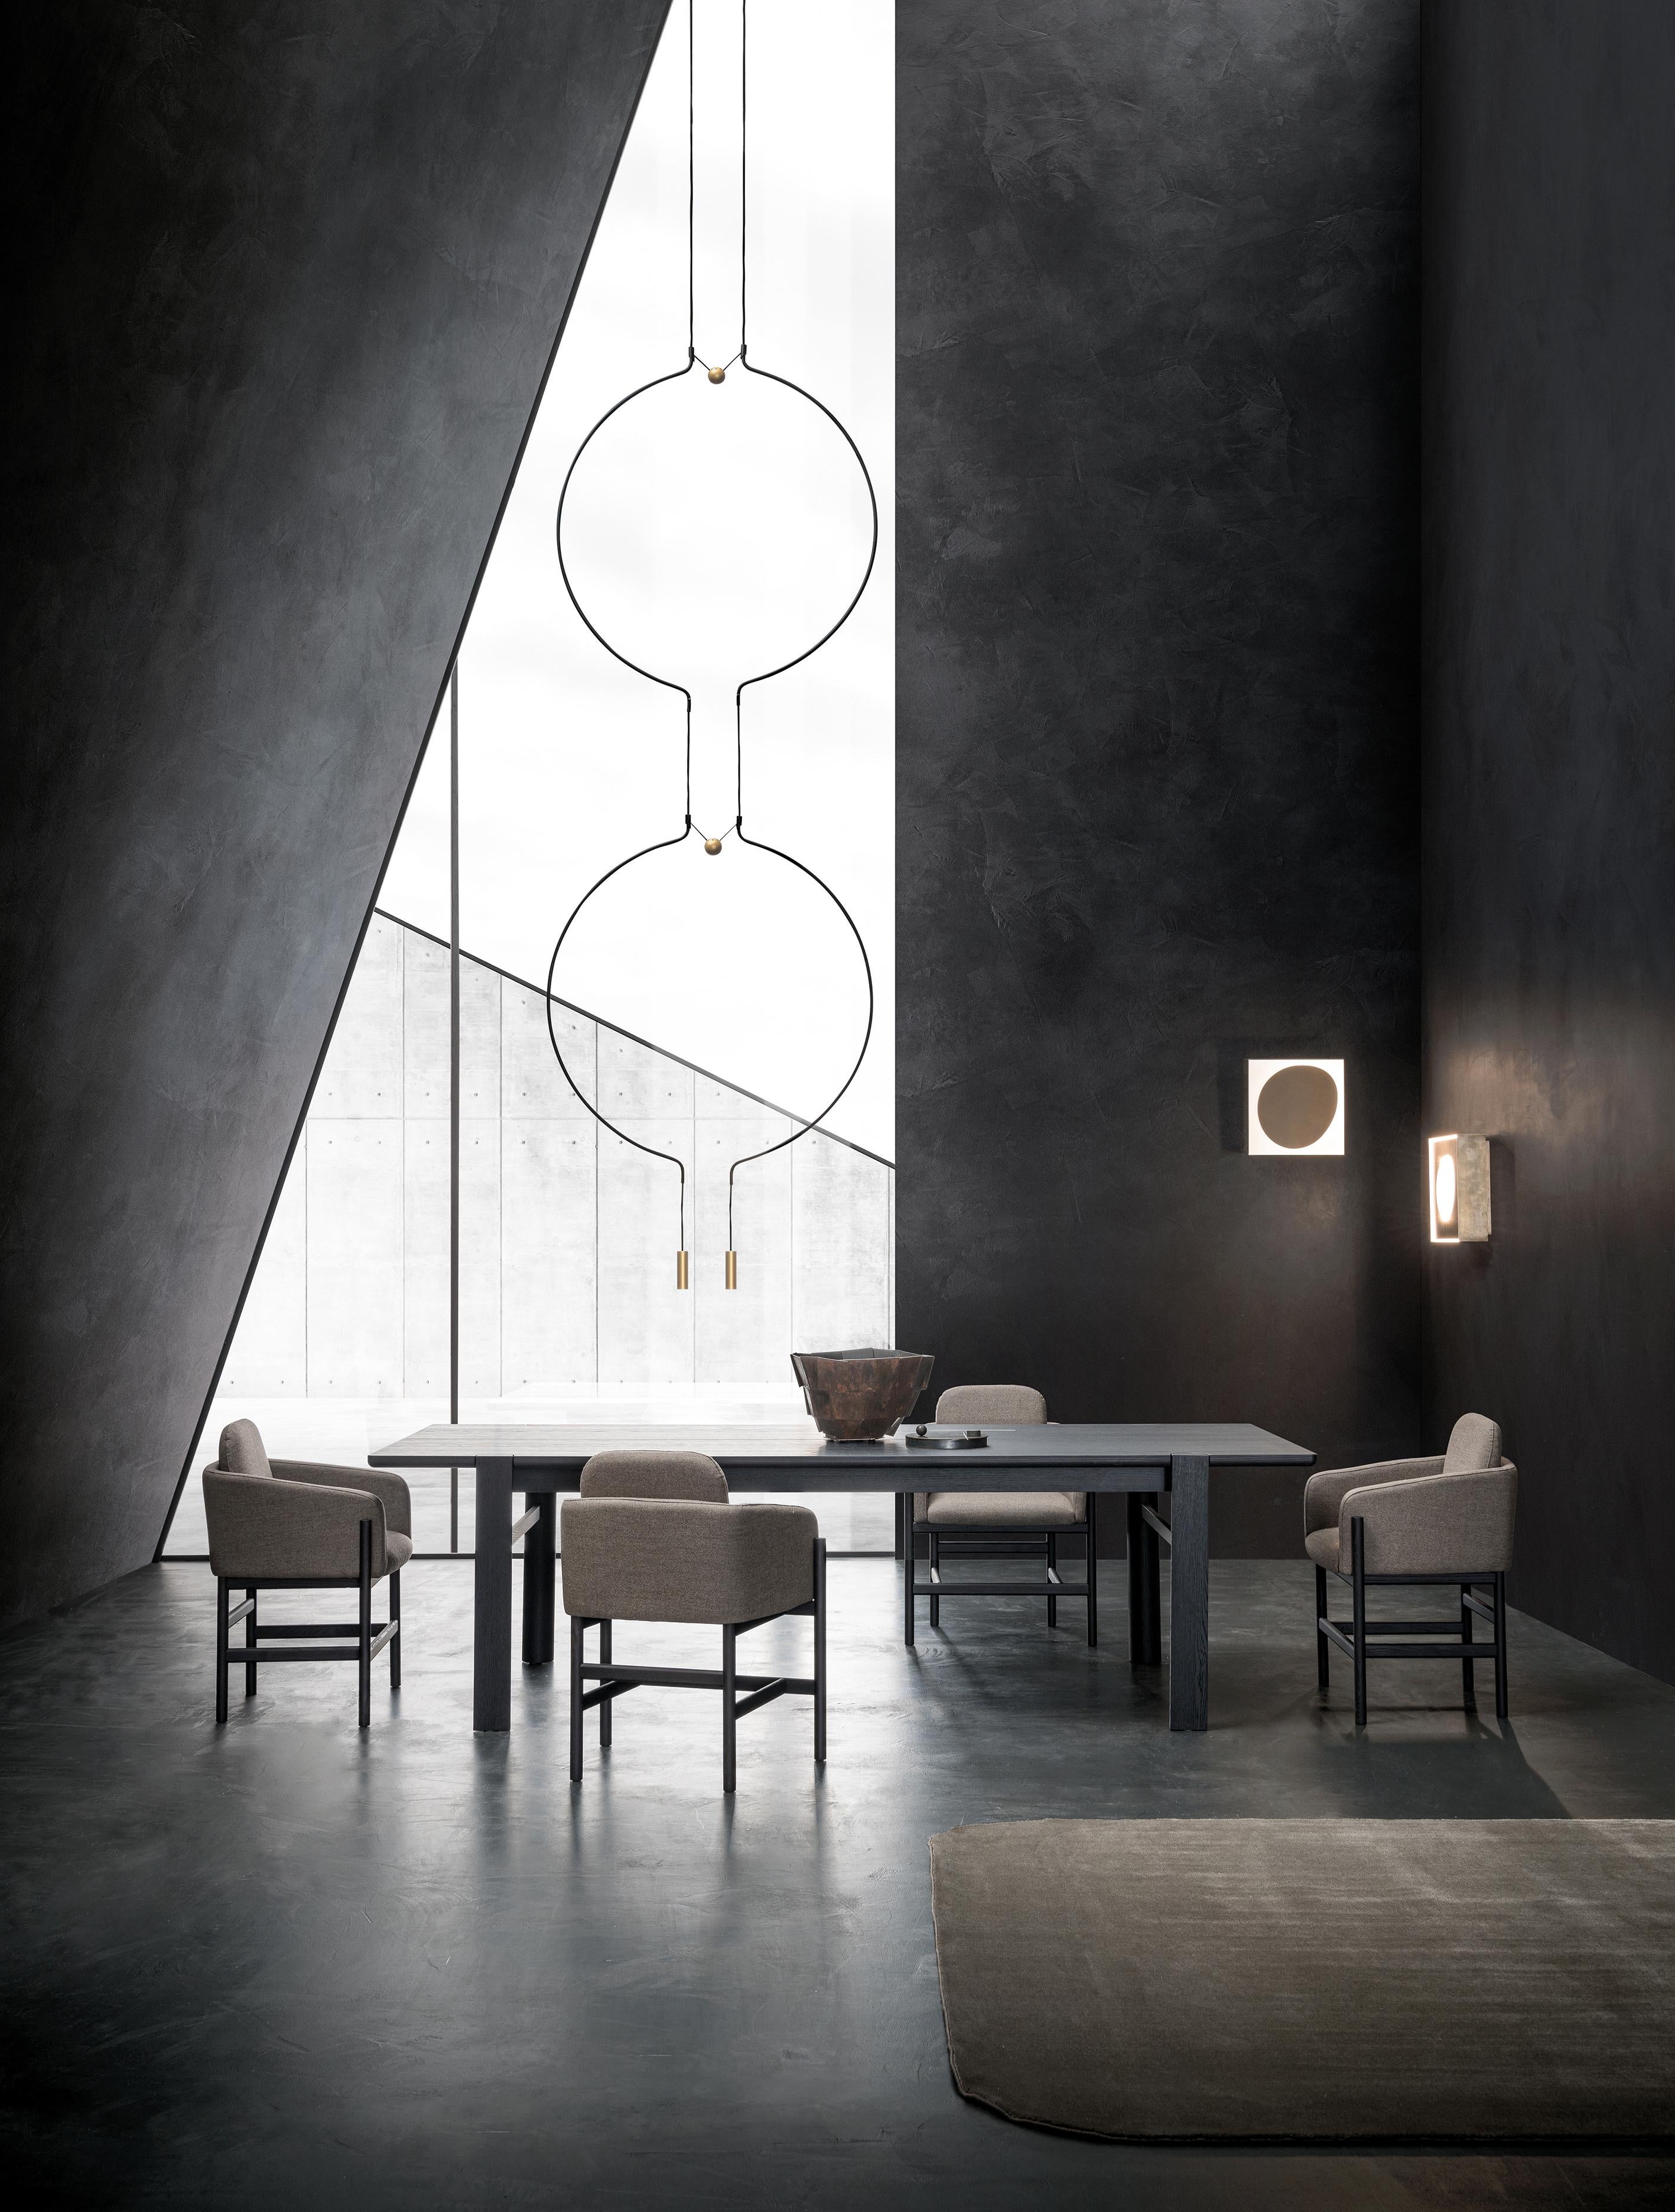 Axolight Liaison Model M4 Pendant Lamp in Gold/Black by Sara Moroni

Modular lightness and elegance. Liaison tells about the perfect balance of three geometric archetypes: sphere, circle and cylinder compose a system that includes the single pendant